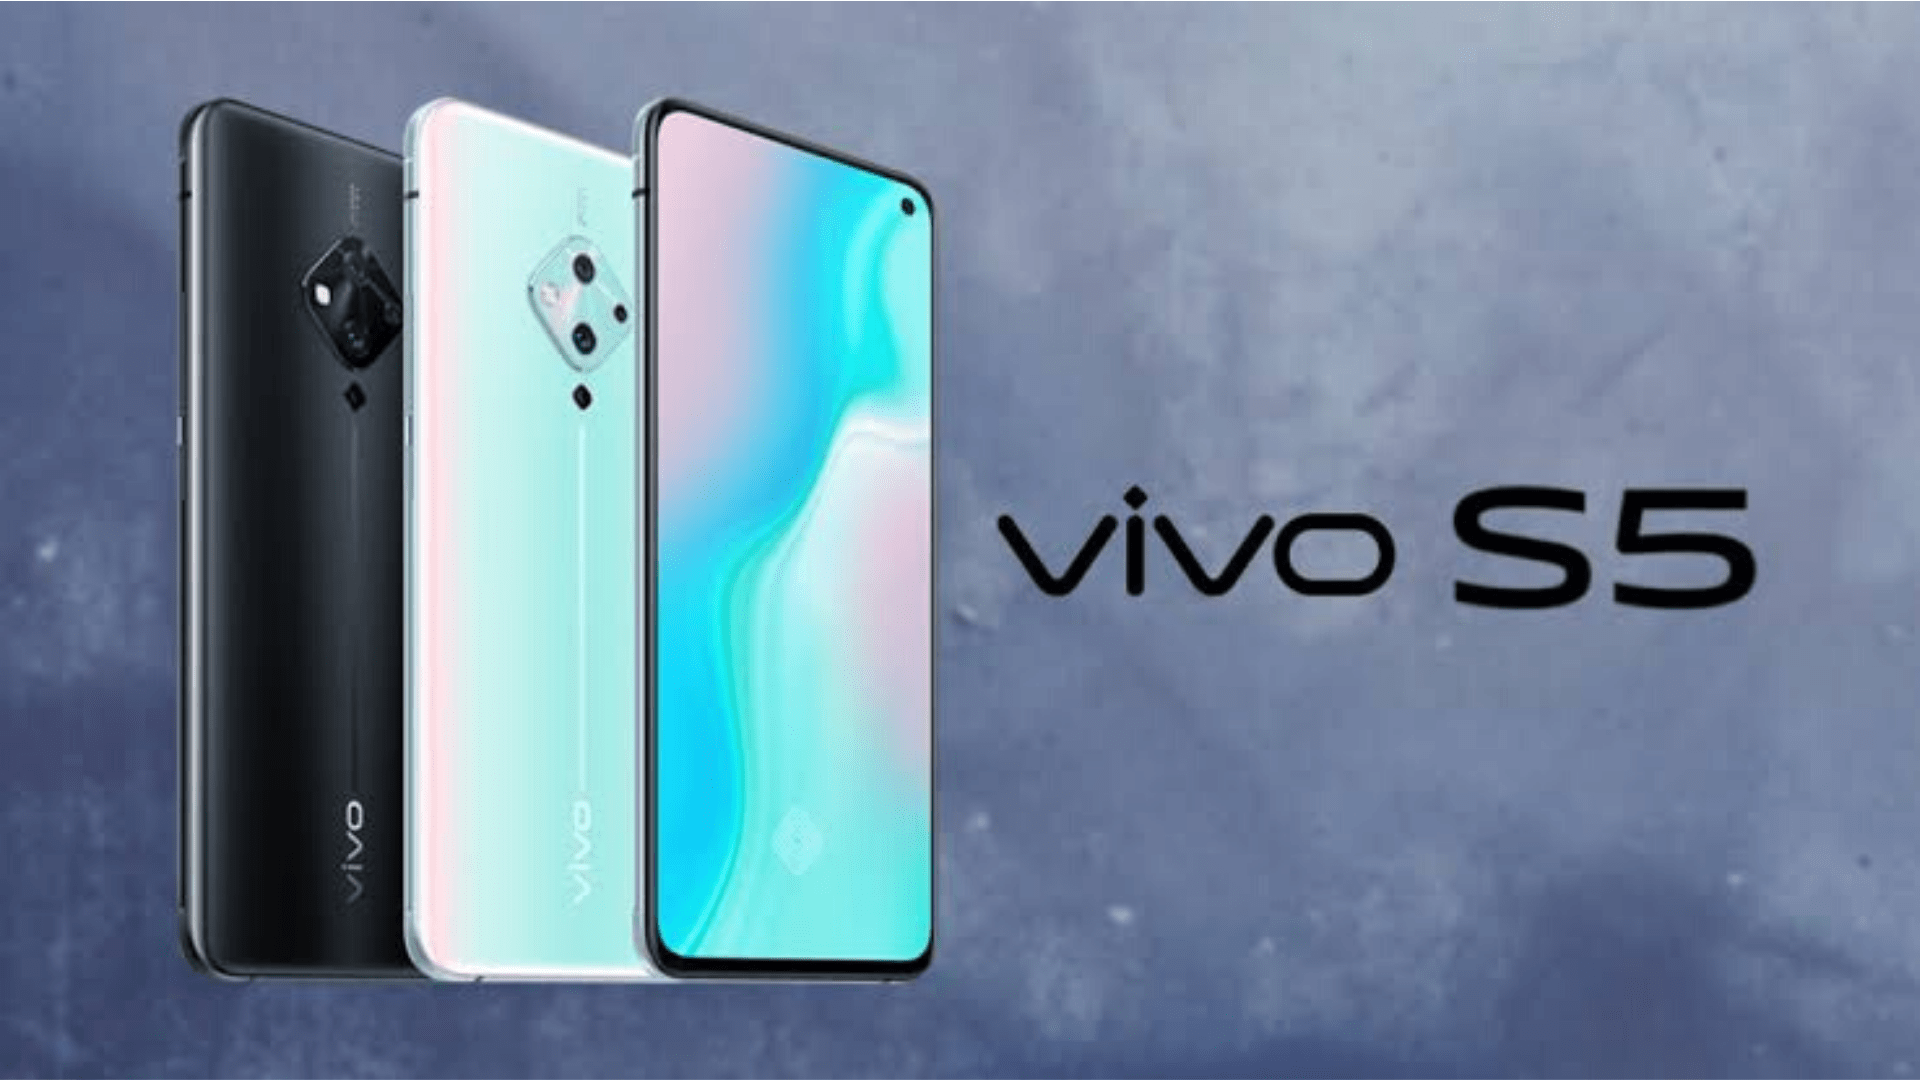 One such phone from Vivo that will be liked at first sight